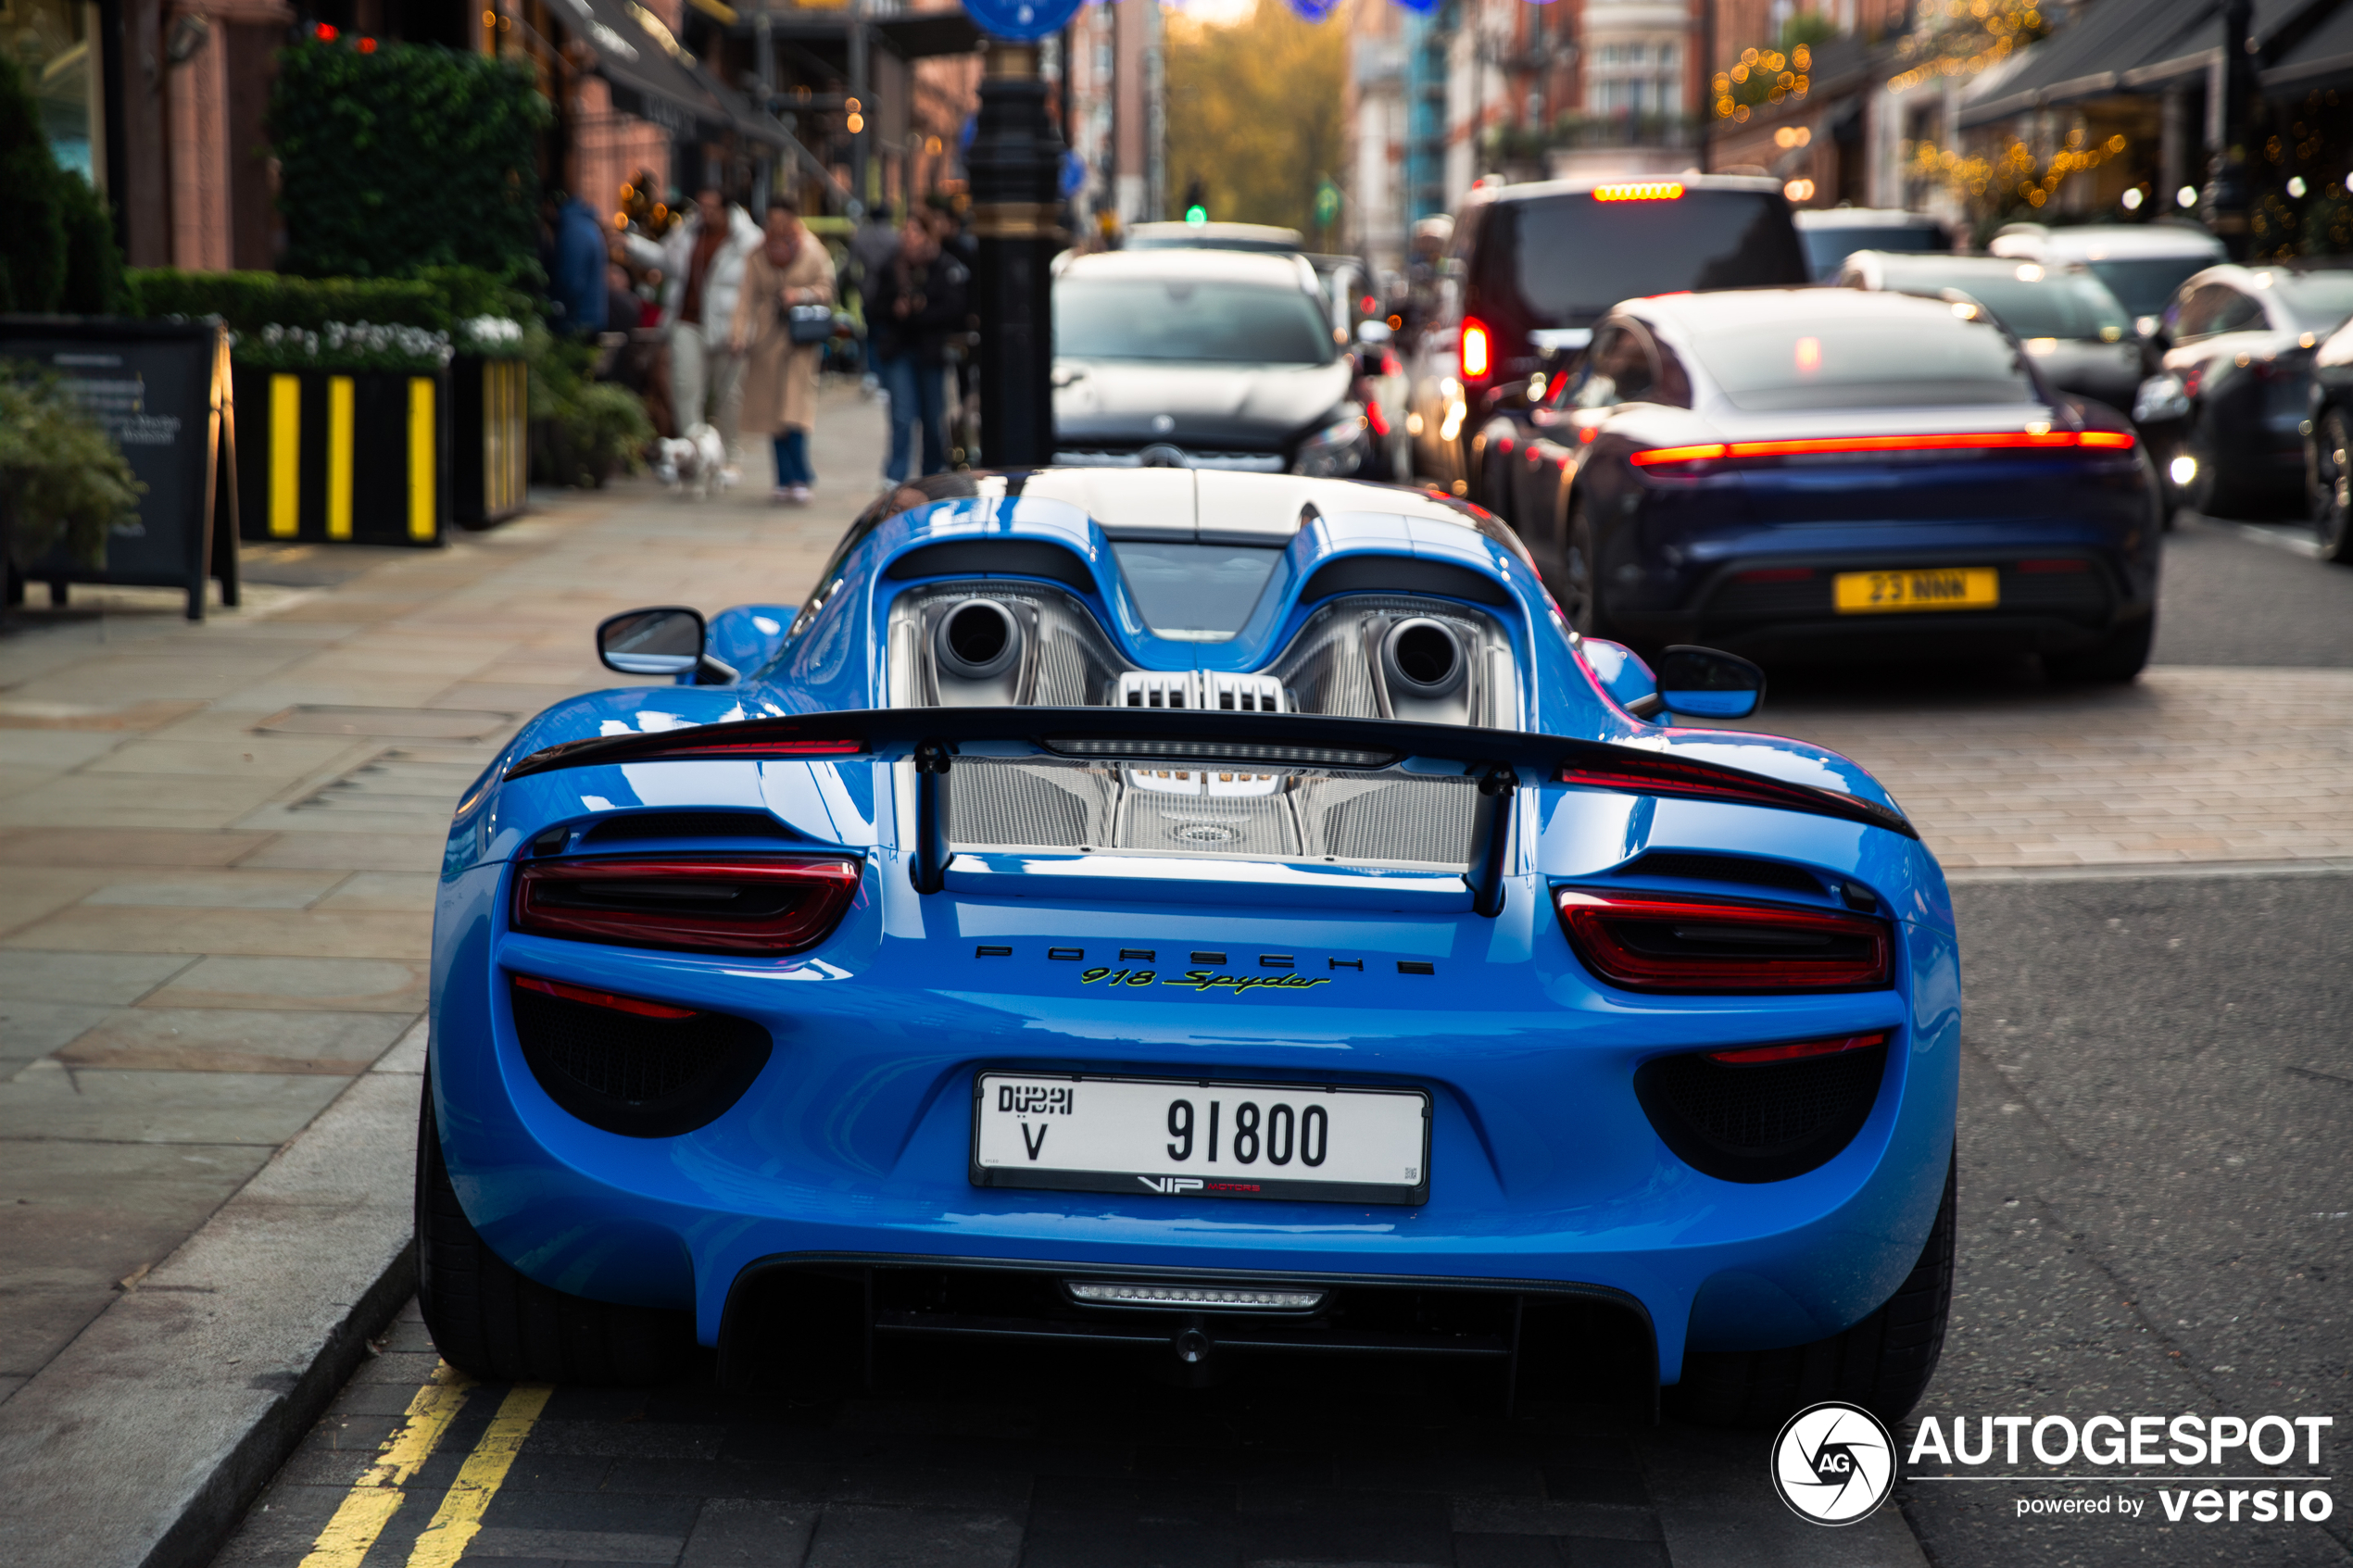 This 918 shows up with a fresh look in no time